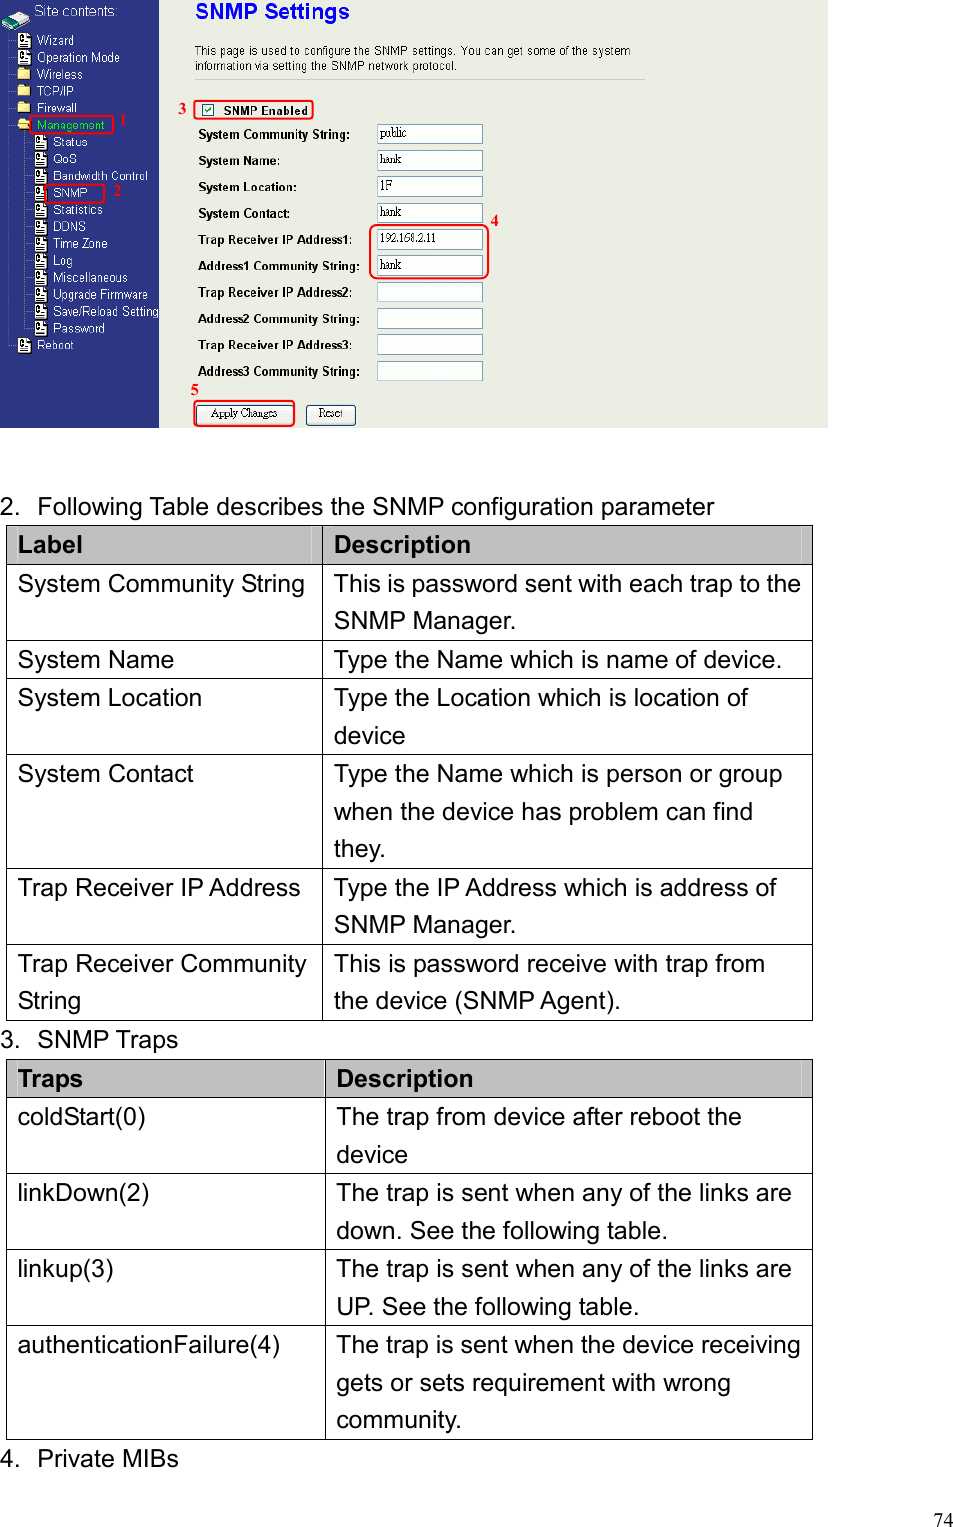  74  2.  Following Table describes the SNMP configuration parameter Label  Description System Community String  This is password sent with each trap to the SNMP Manager. System Name  Type the Name which is name of device. System Location  Type the Location which is location of device System Contact  Type the Name which is person or group when the device has problem can find they. Trap Receiver IP Address  Type the IP Address which is address of SNMP Manager. Trap Receiver Community String This is password receive with trap from the device (SNMP Agent). 3. SNMP Traps Traps  Description coldStart(0)  The trap from device after reboot the device linkDown(2)  The trap is sent when any of the links are down. See the following table. linkup(3)  The trap is sent when any of the links are UP. See the following table. authenticationFailure(4)  The trap is sent when the device receiving gets or sets requirement with wrong community. 4. Private MIBs 12345